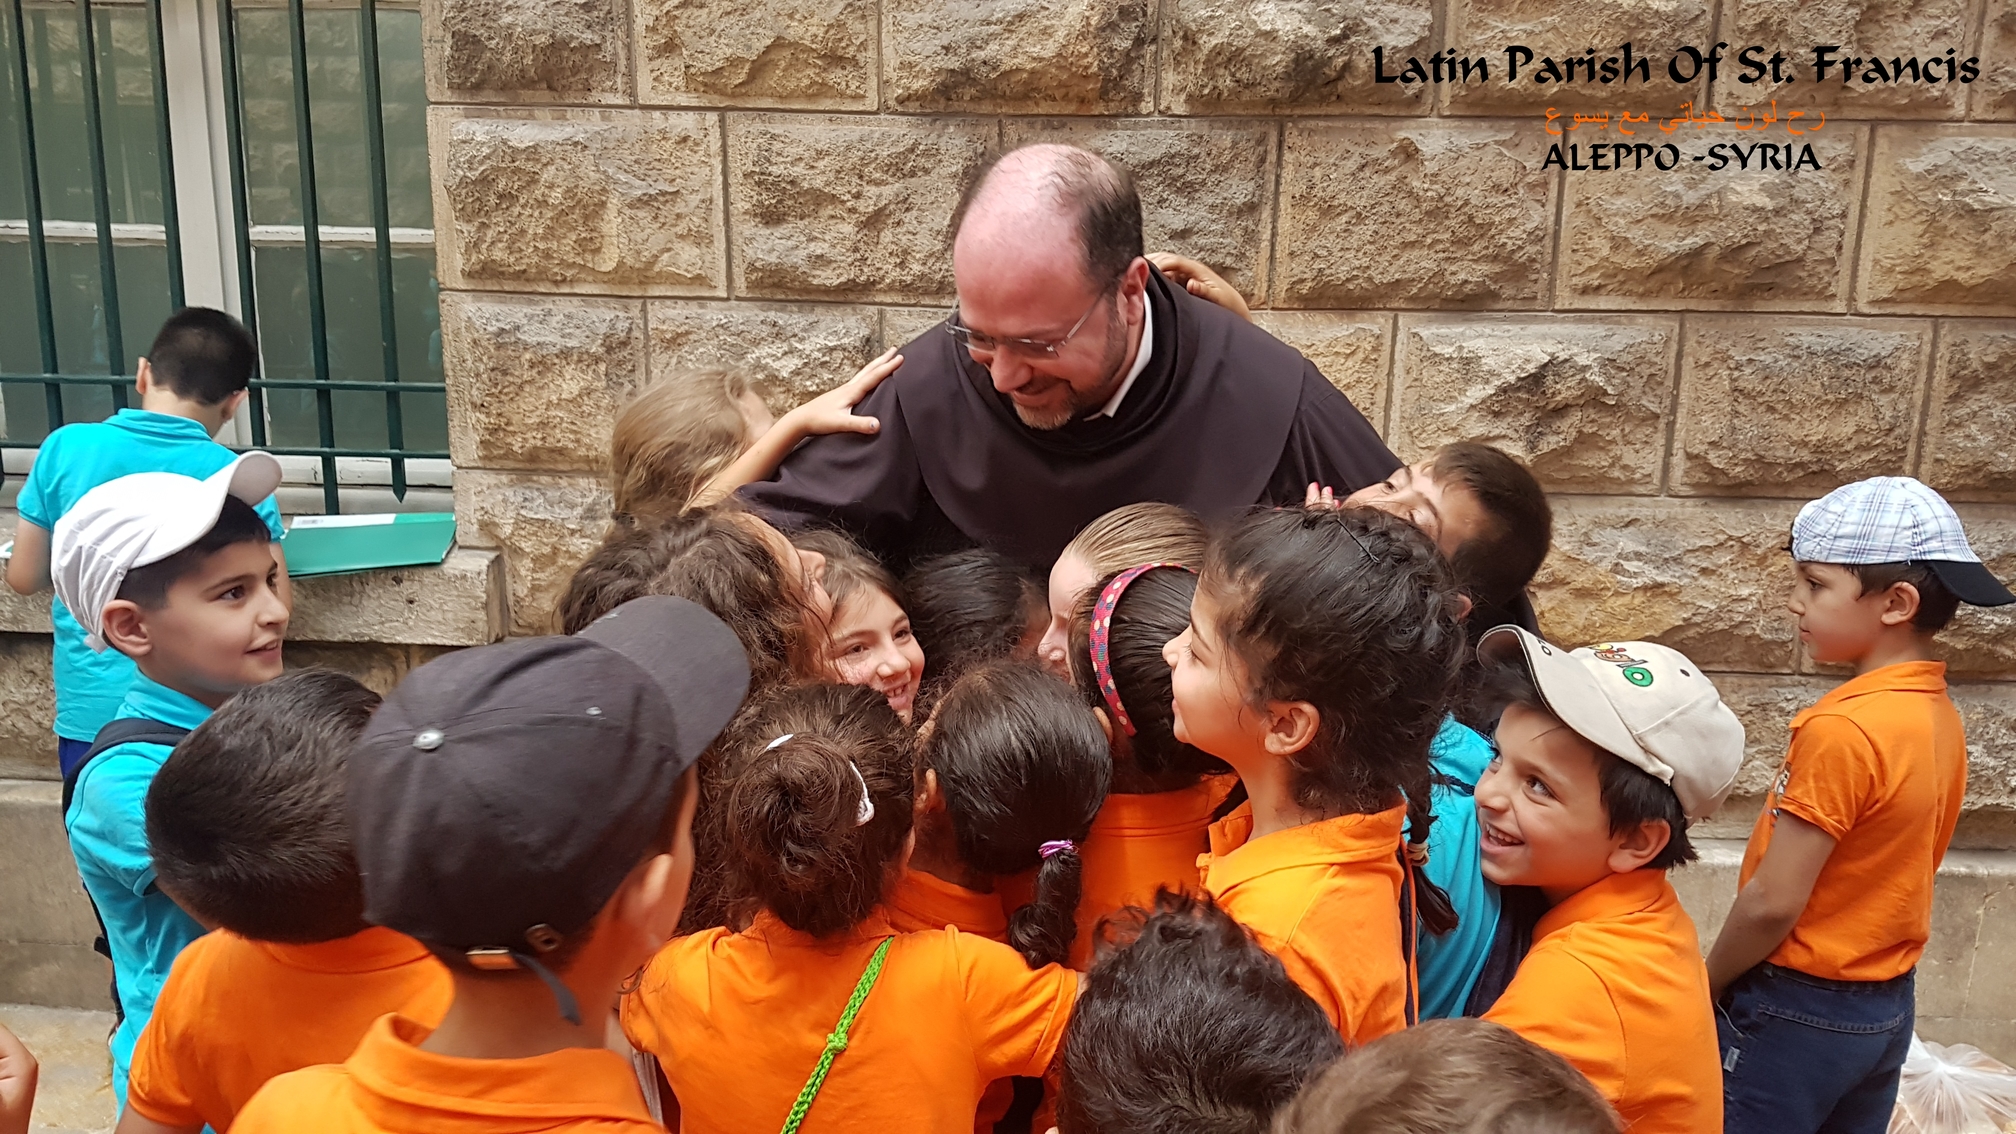 The children of the Latin parish St. Francis of Aleppo with the parish priest  Fr. Ibrahim Alsabagh